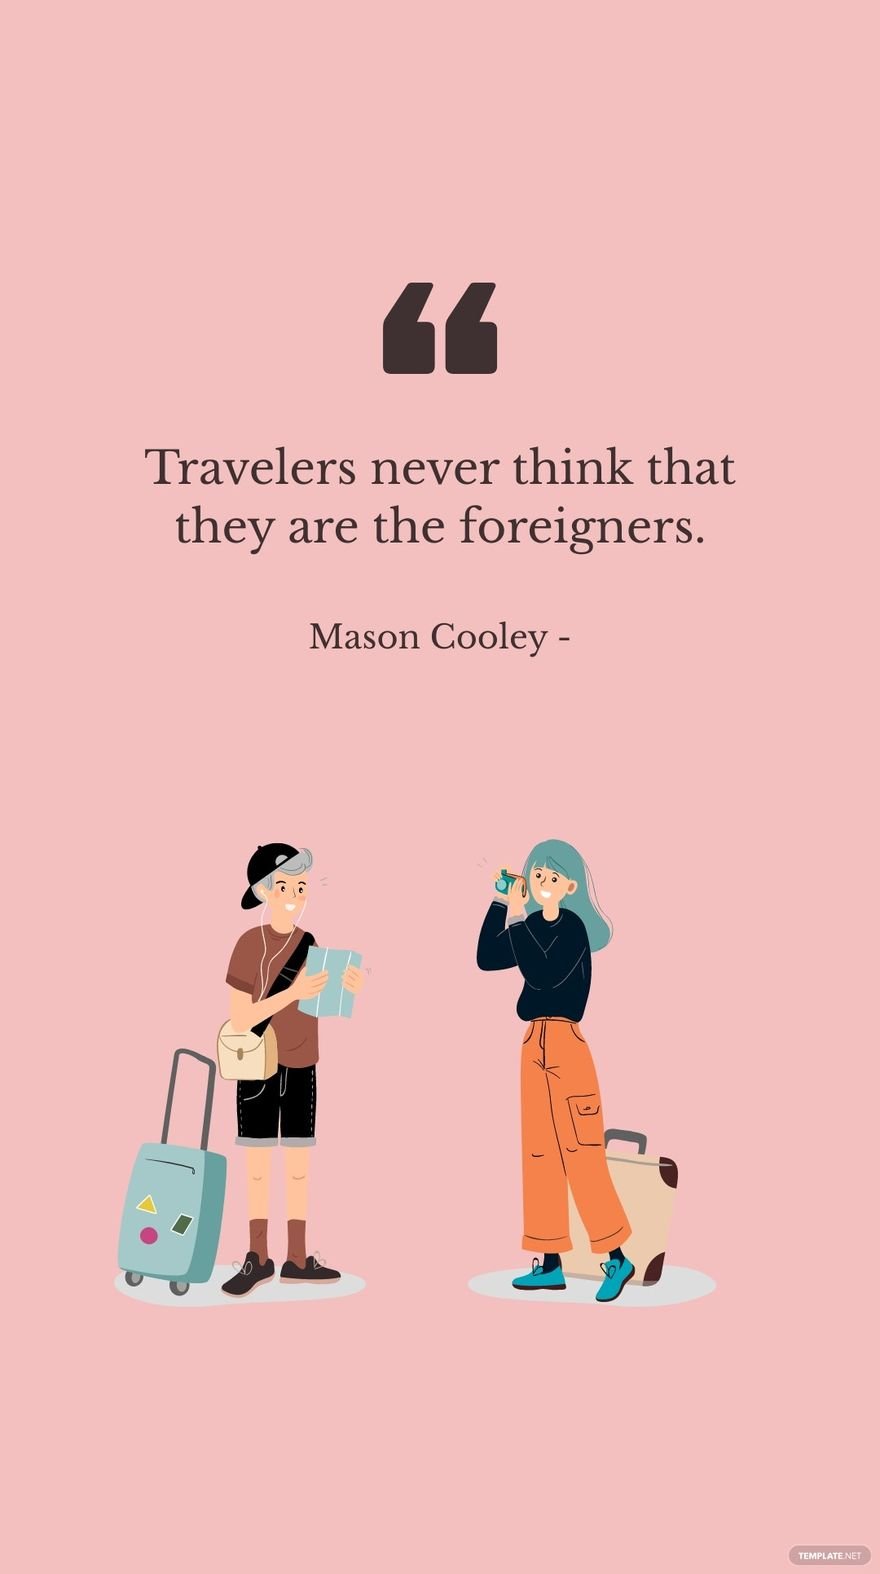 Mason Cooley - Travelers never think that they are the foreigners. in JPG